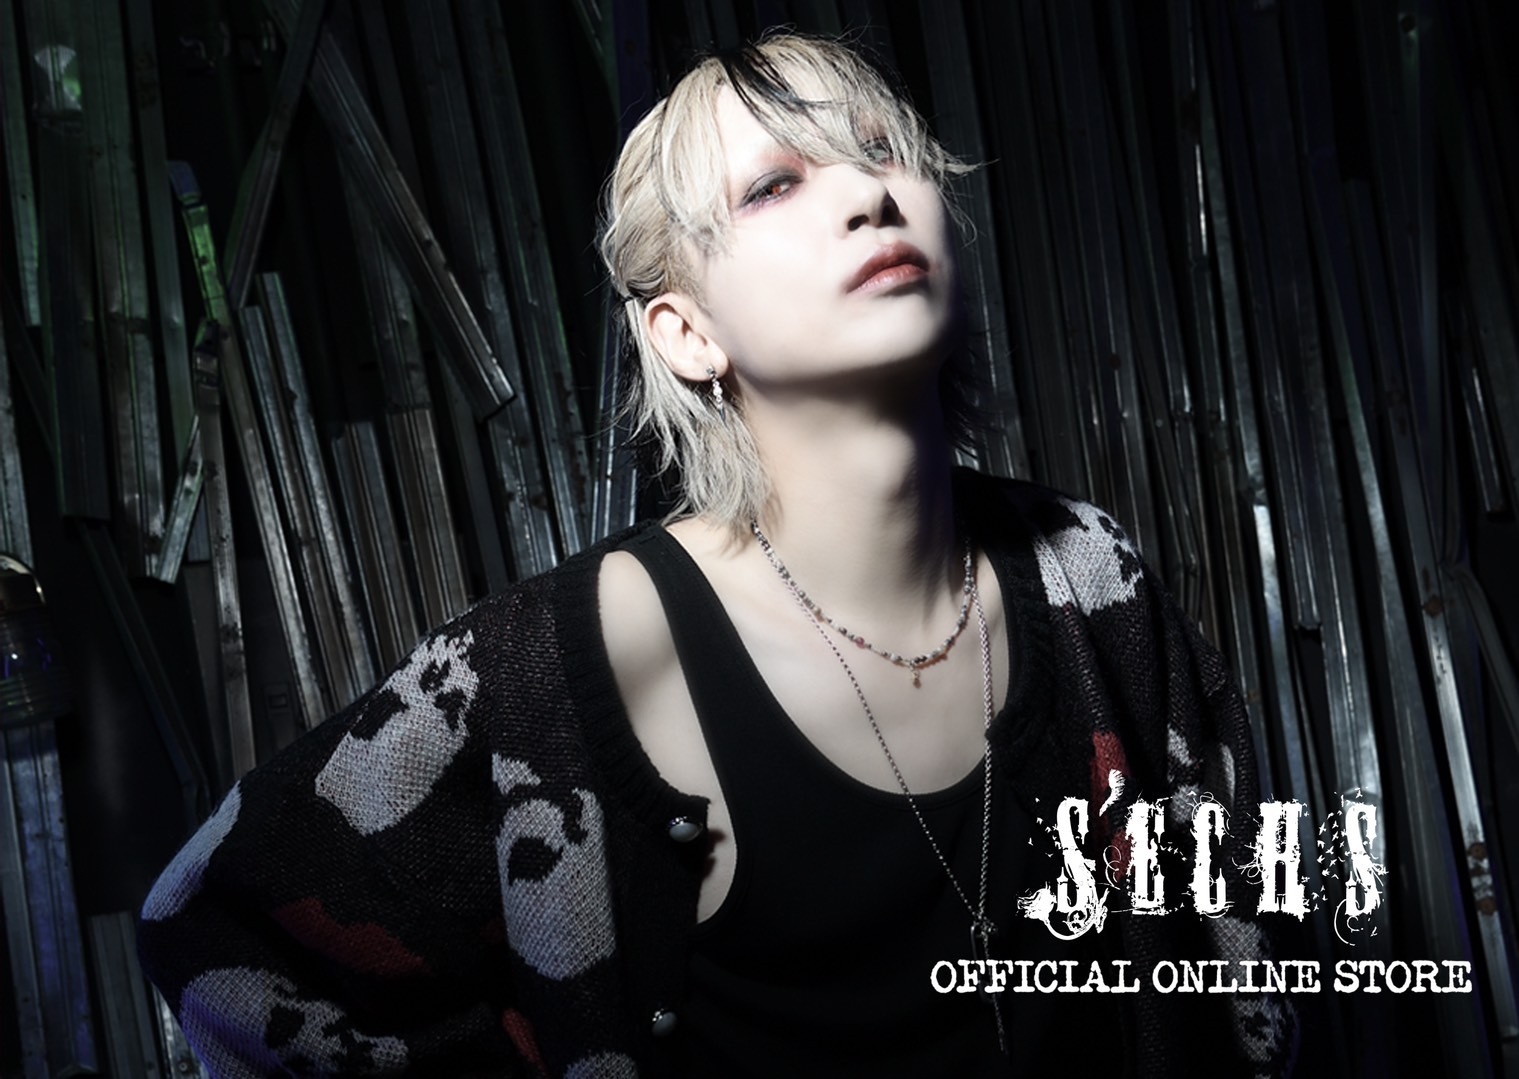 Karyu OFFICIAL STORE